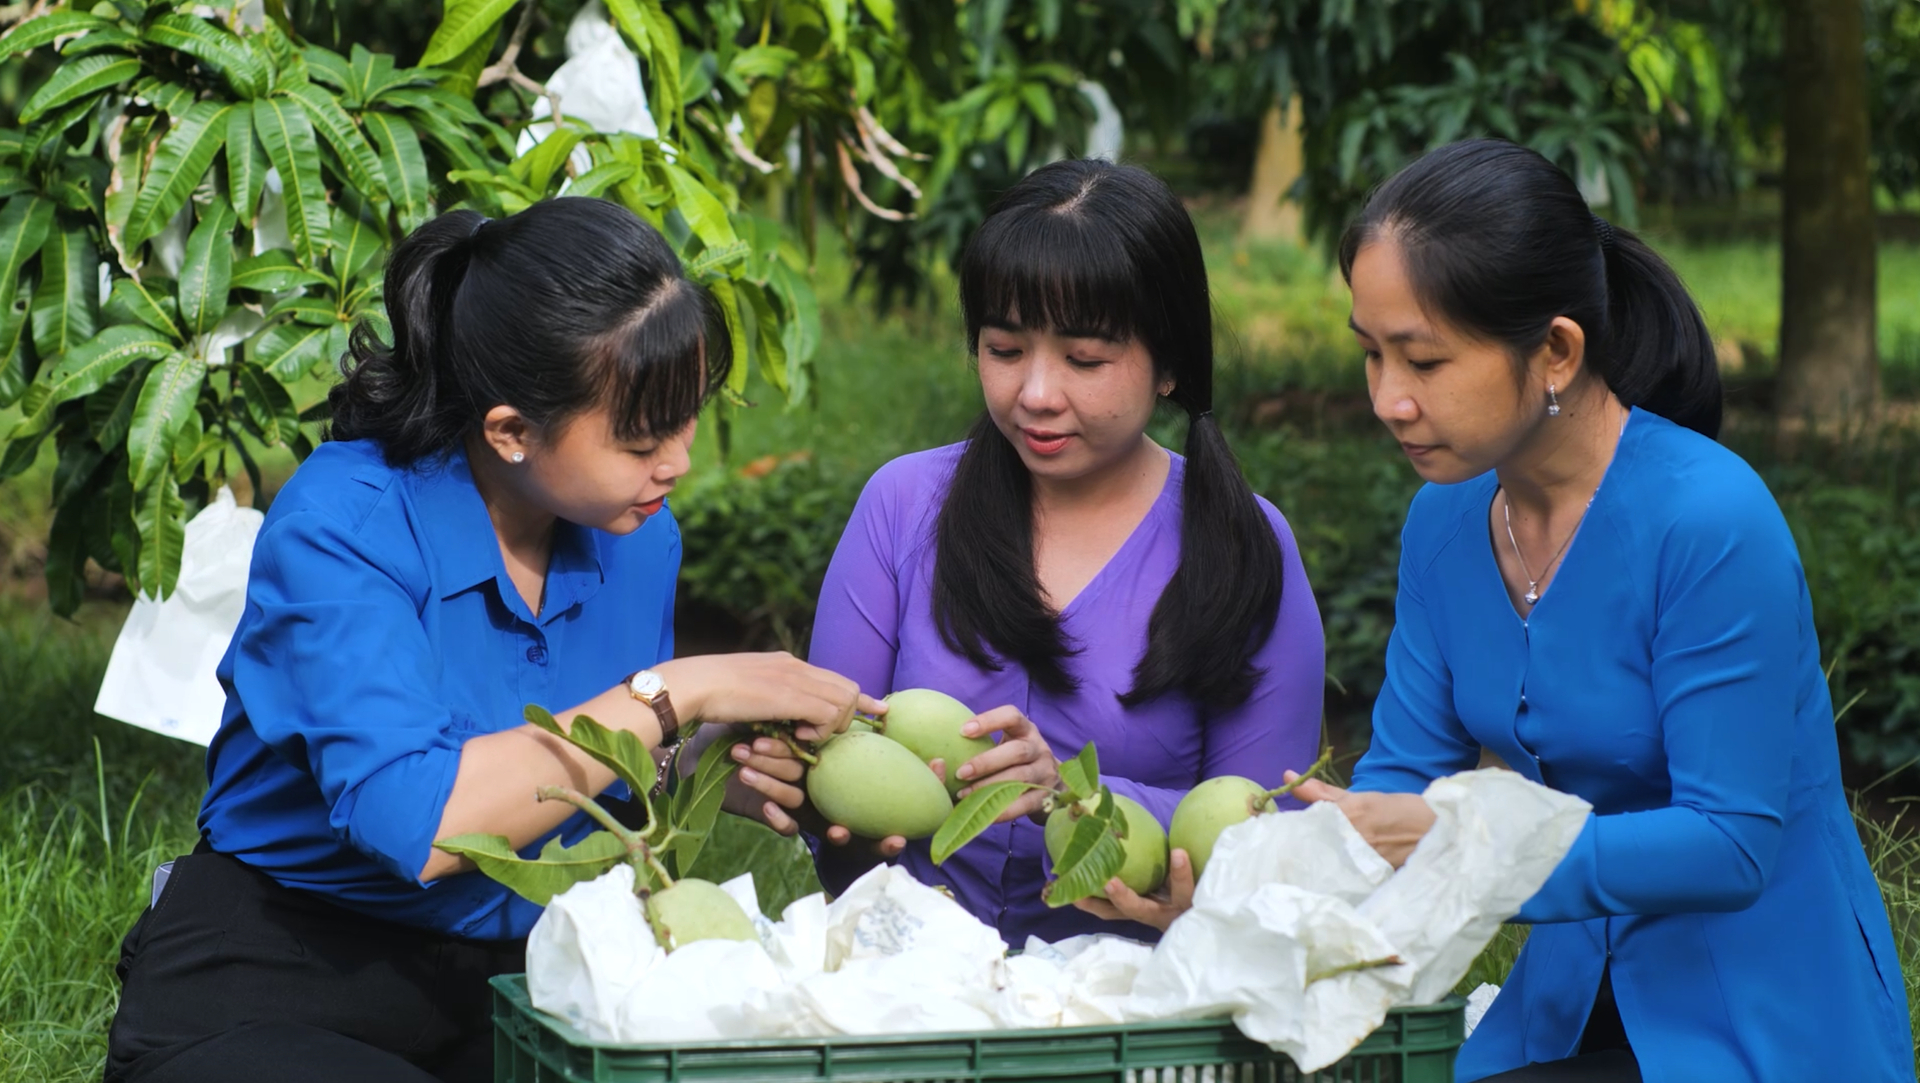 Proper cultivation following 'standard' procedures is important for Vietnamese fruit products to have a foothold in markets.